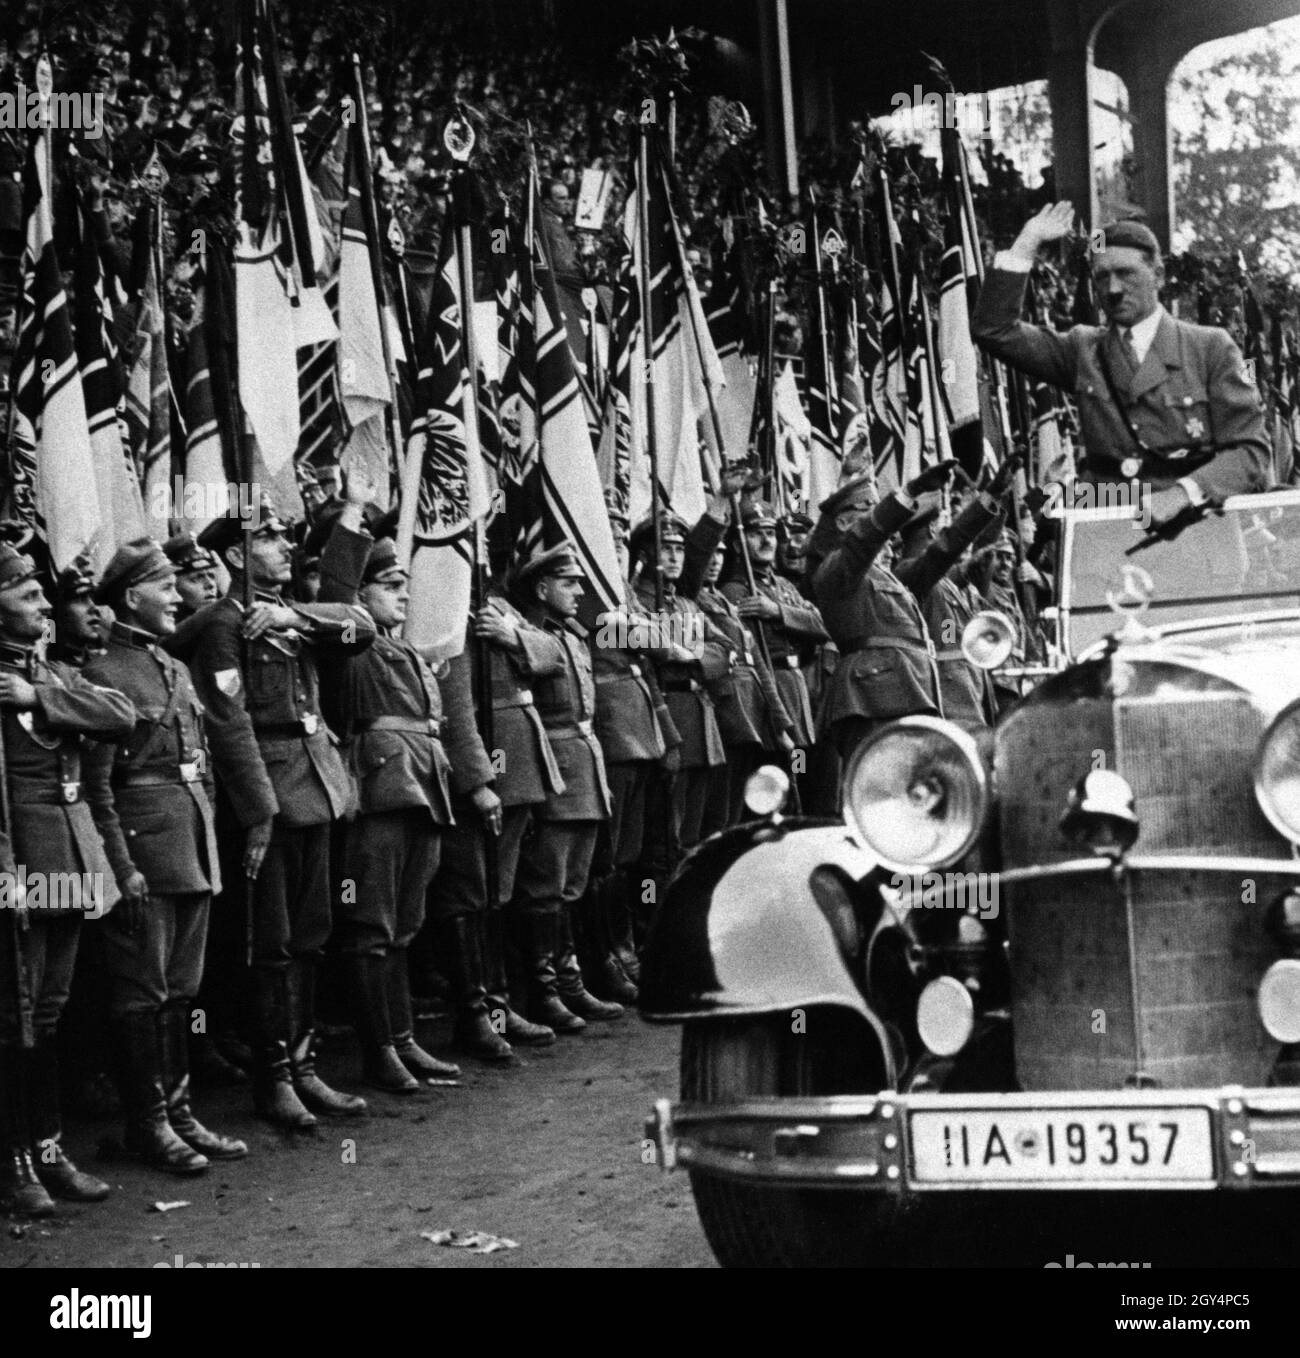 At the Stahlhelm Reichsführer conference, Hitler drives off a front of Stahlhelm members in a Mercedes 770. [automated translation] Stock Photo